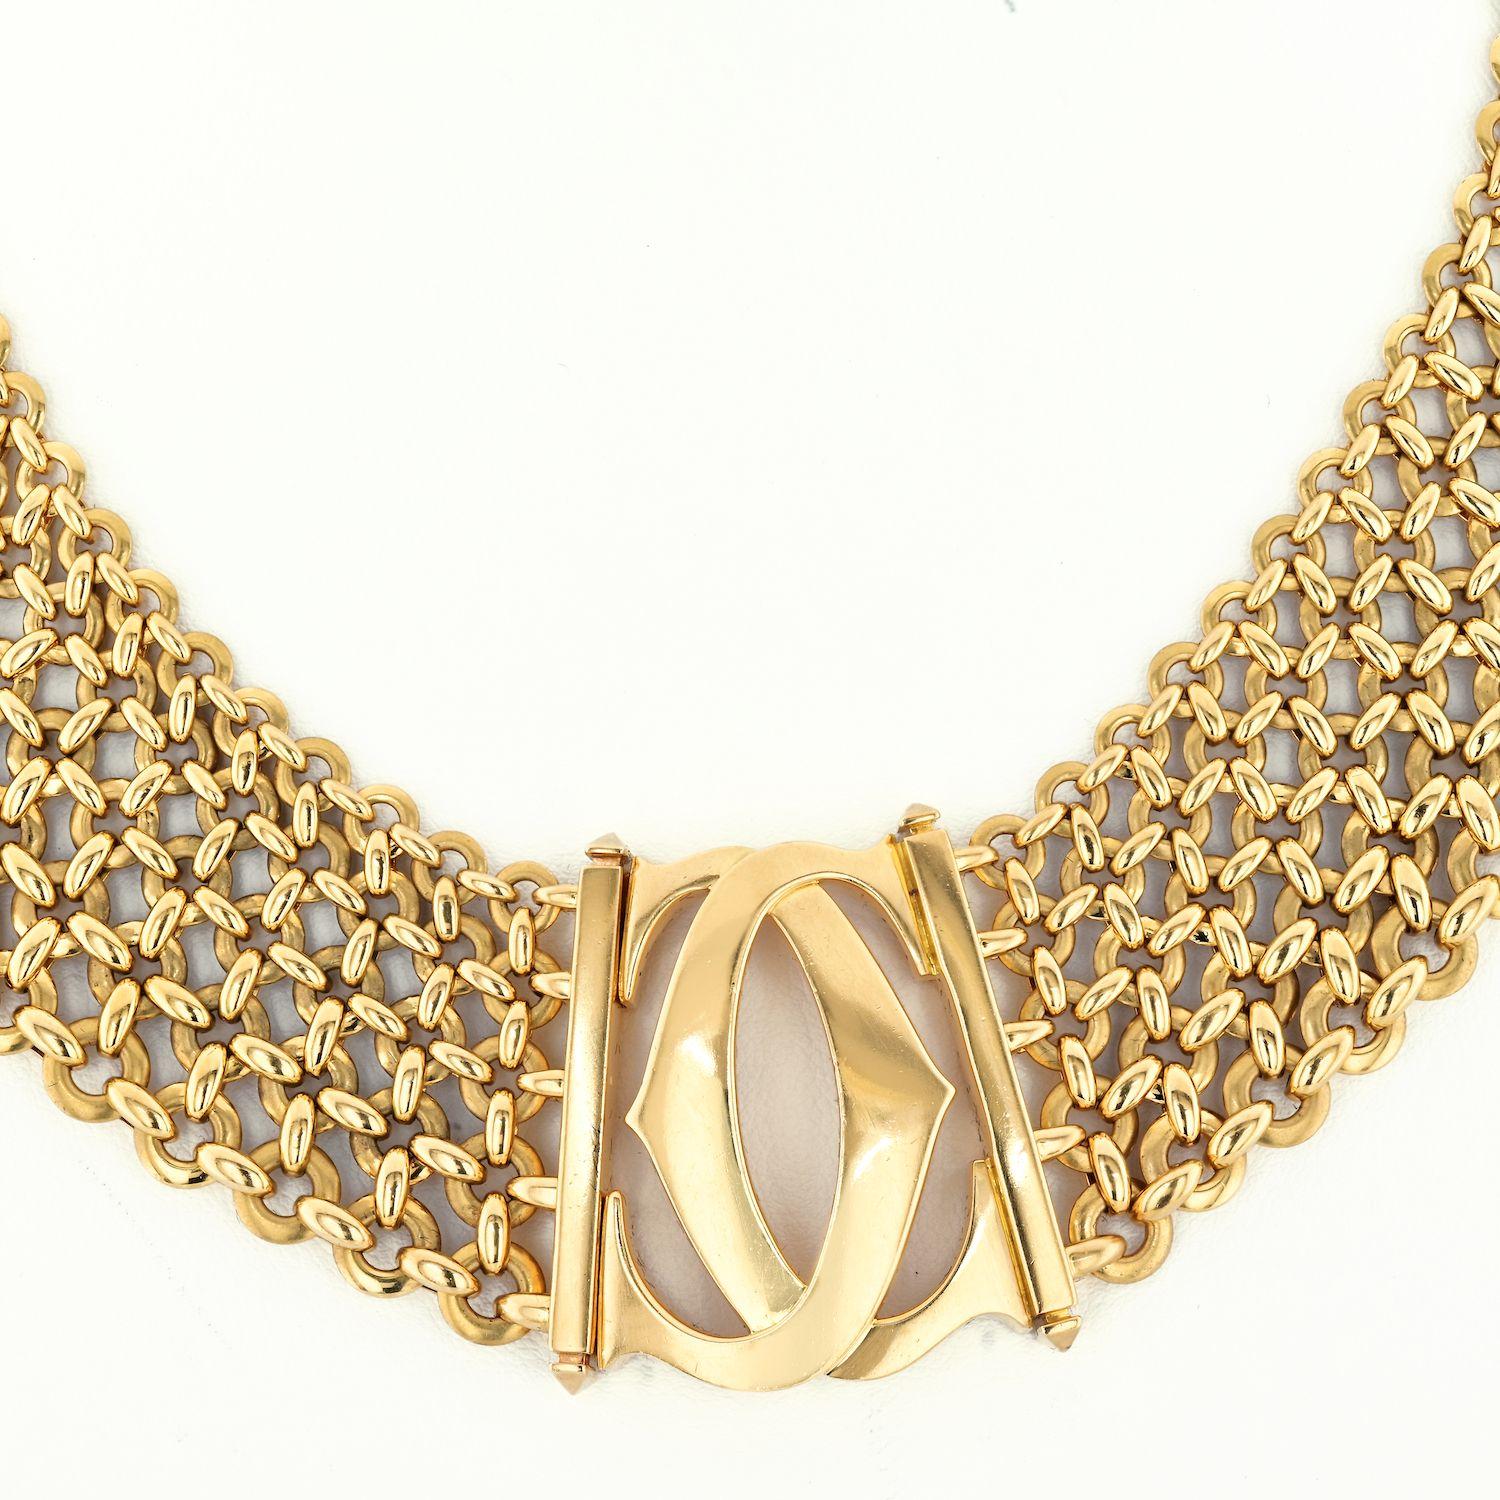 Modern Cartier 18K Yellow Gold Double C Five Row Wide Link Penelope Necklace